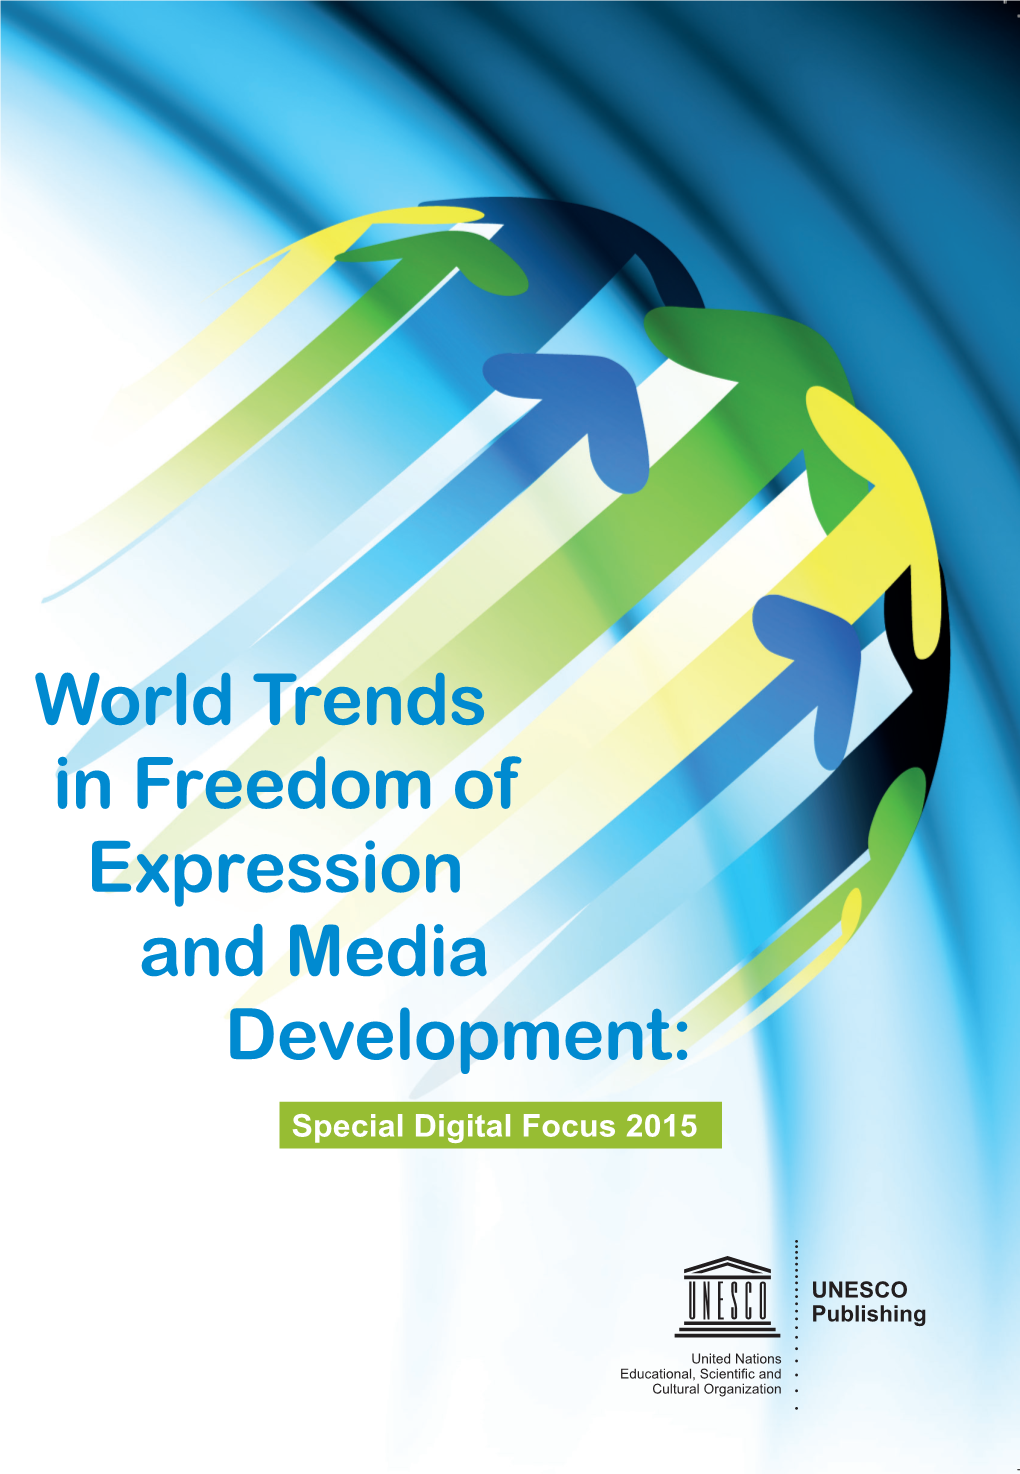 World Trends in Freedom of Expression and Media Development: Special Digital Focus 2015